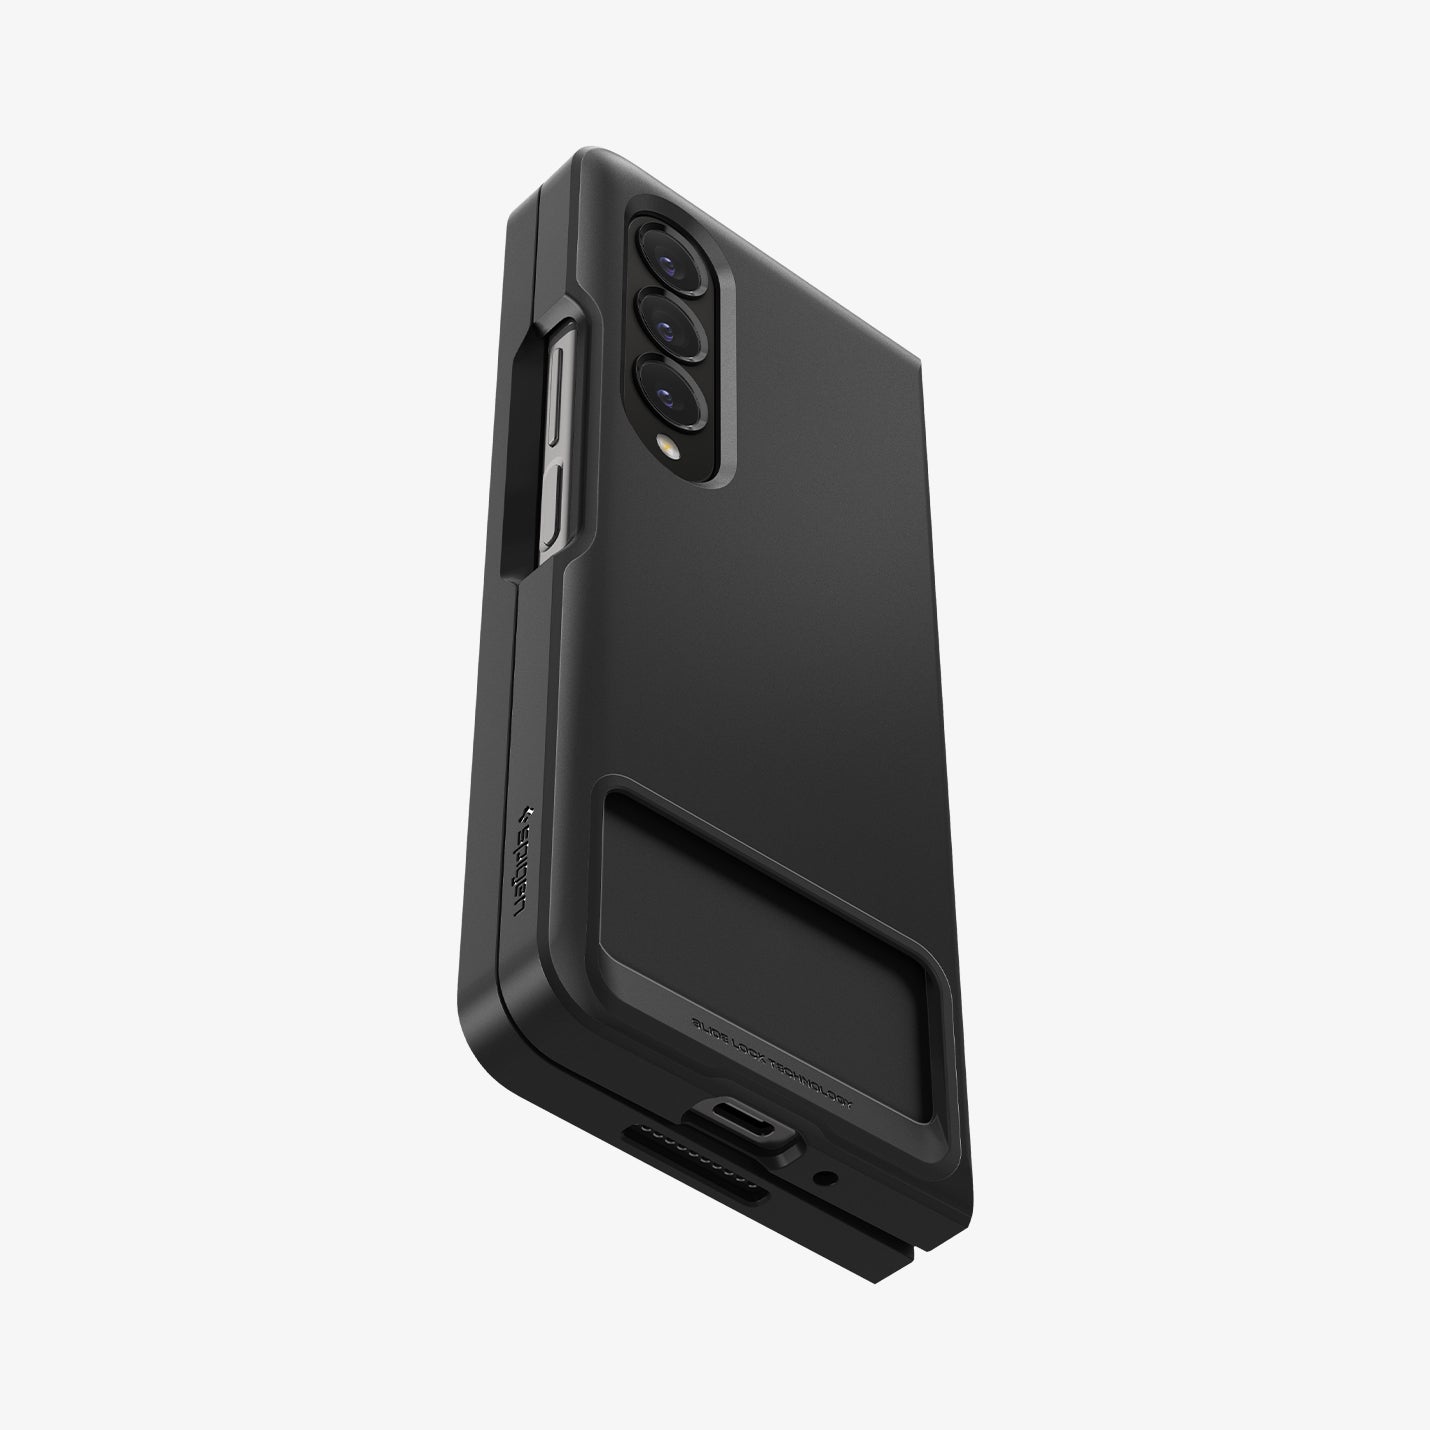 ACS05108 - Galaxy Z Fold 4 Series Slim Armor Slot Case in Black showing the back and partial side of a folded device with card slot